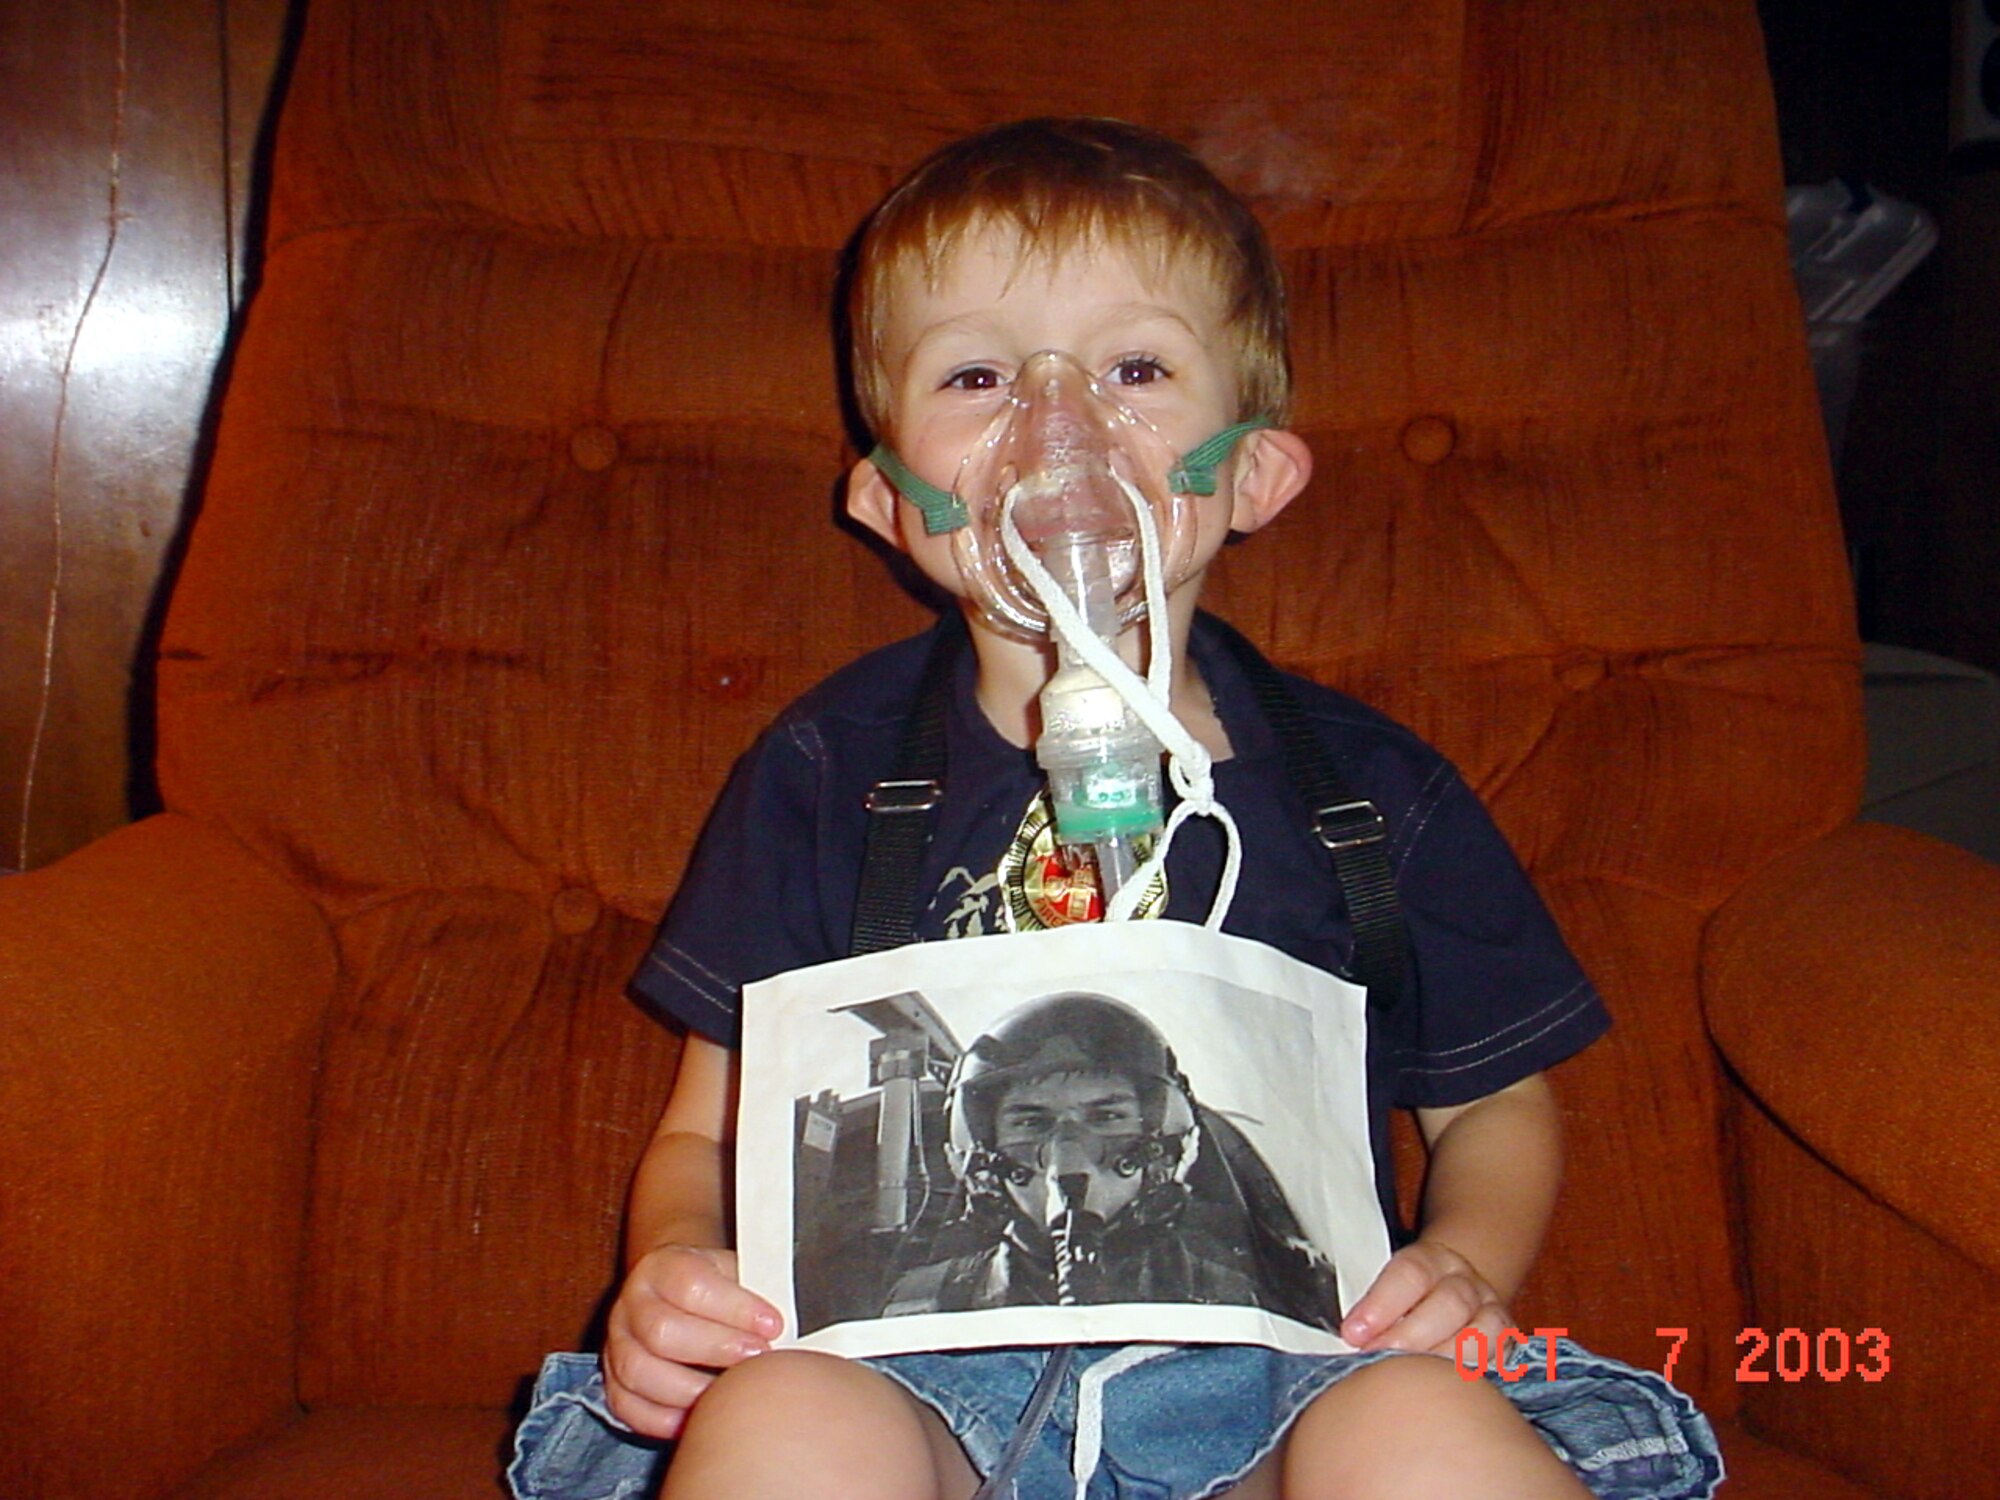 NICEVILLE, Fla. -- Blake Henderson, 4, shares his photo of Capt. James Dykas during a treatment in October.  The picture of Captain Dykas, a B1-B Lancer pilot, helped Blake accept wearing the mask he needs to take nebulizer treatments.  (Courtesy photo)